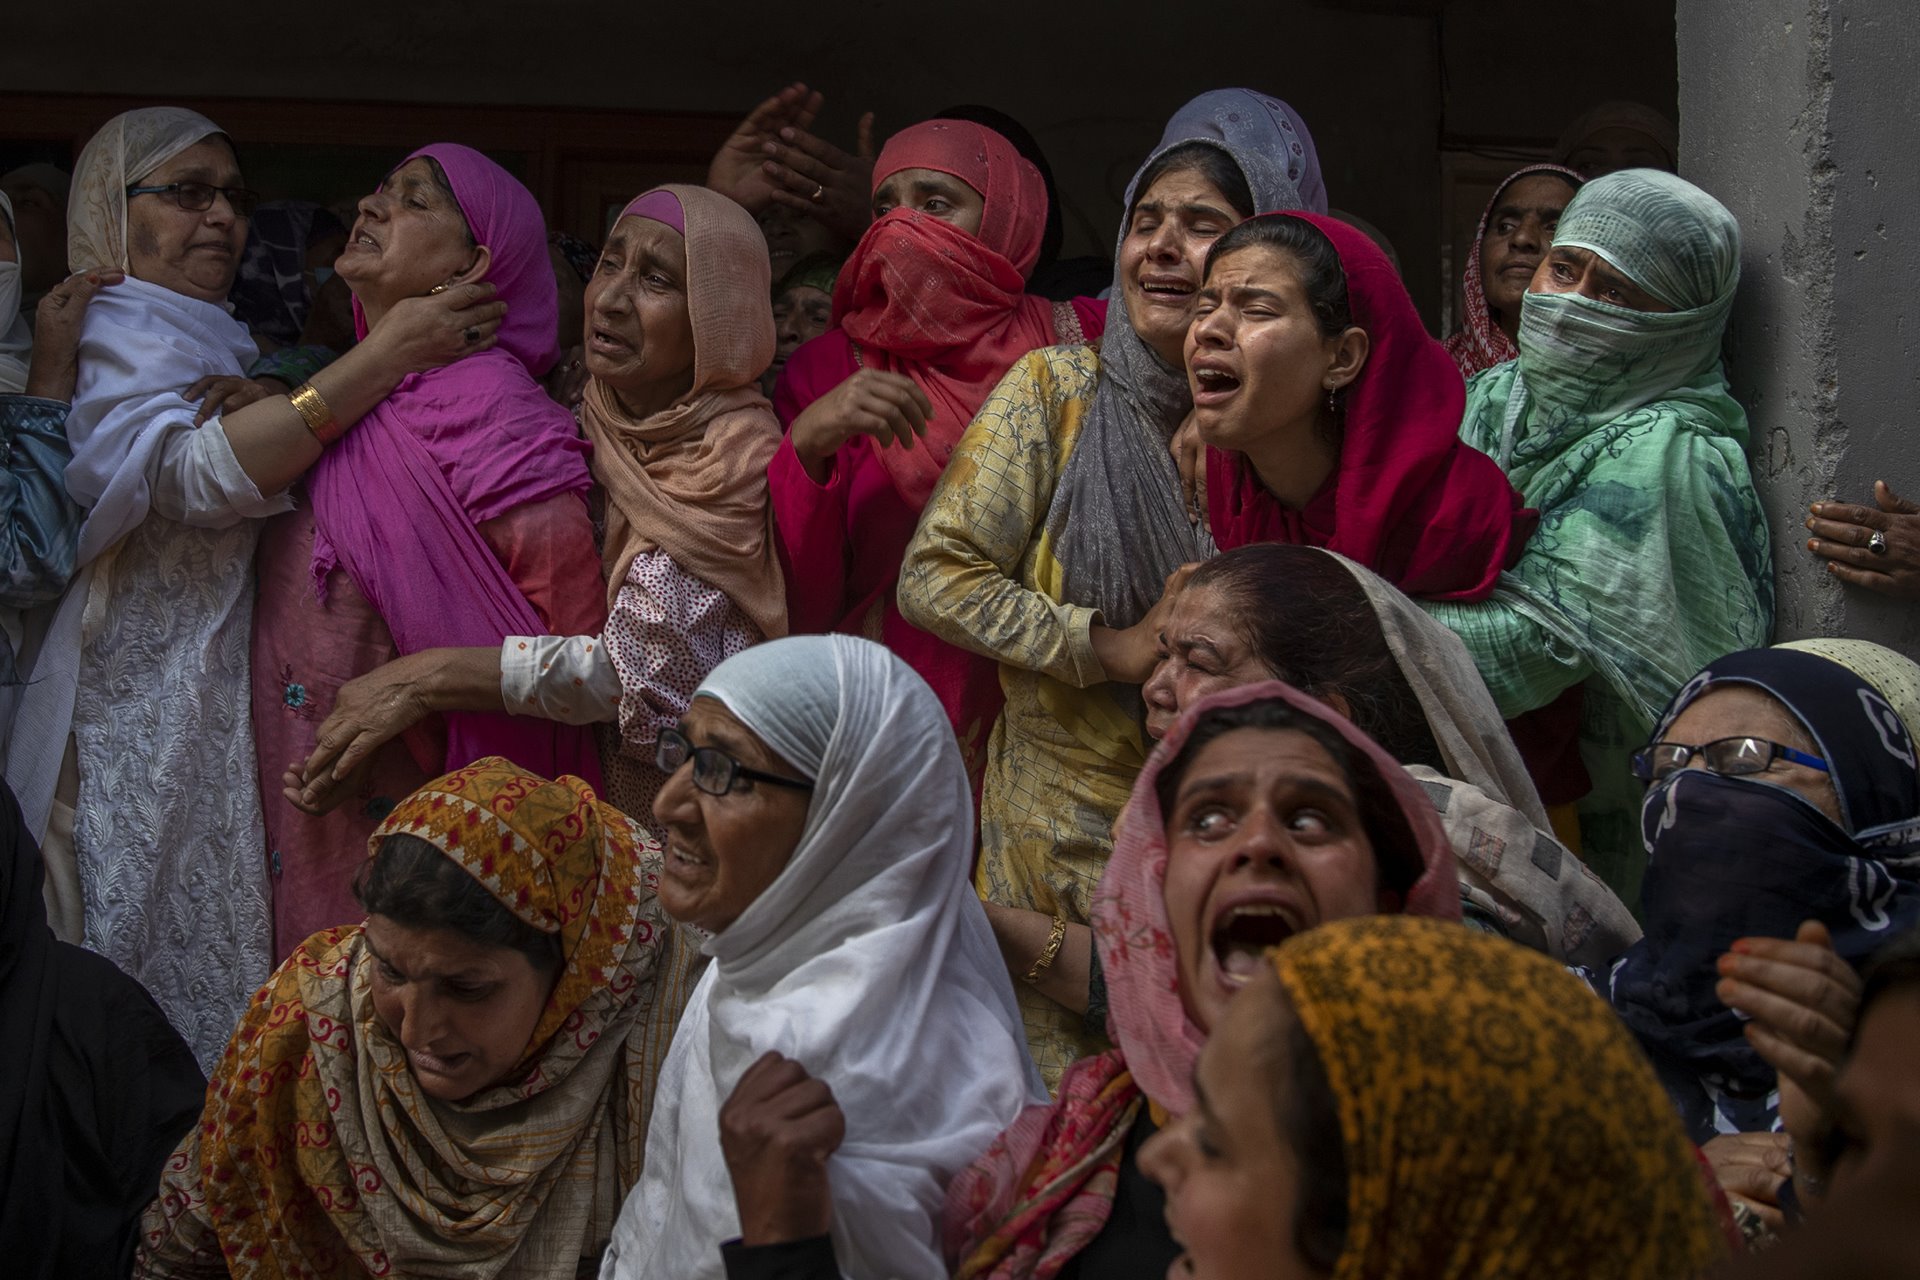 Relatives and neighbors wail during the funeral of Waseem Ahmed, a policeman killed in a shootout, on the outskirts of Srinagar, Indian-administered Kashmir. Two civilians and two police officials were killed in an armed clash the previous day, triggering anti-India protests that accused the police of targeting the civilians.